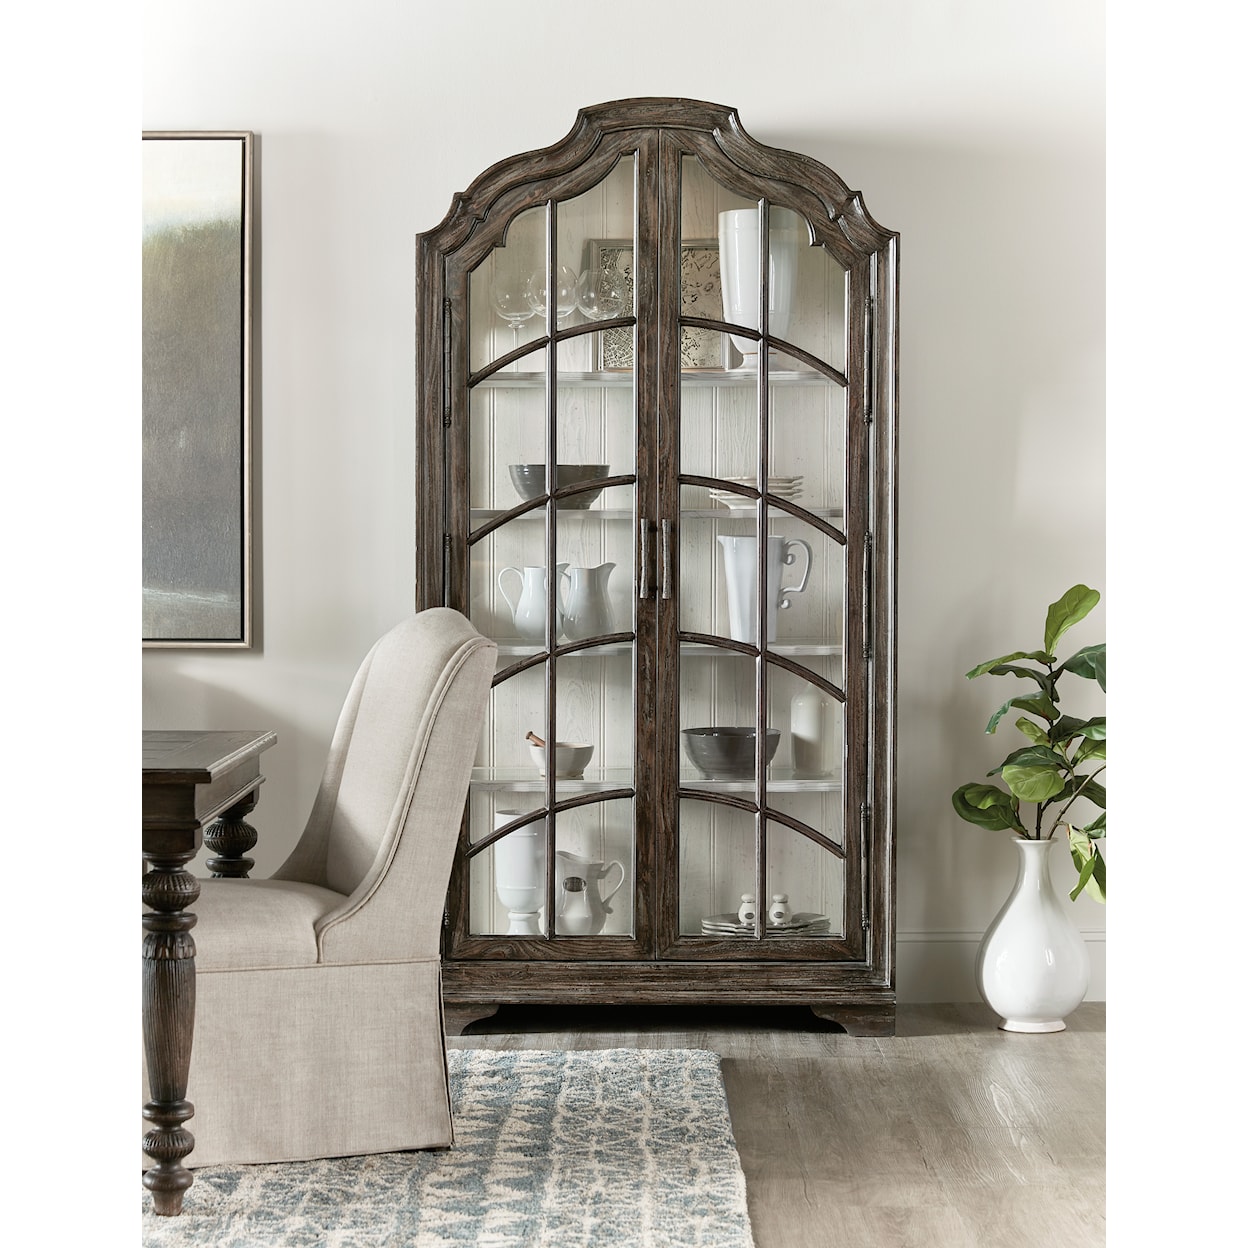 Hooker Furniture Traditions Curio Cabinet